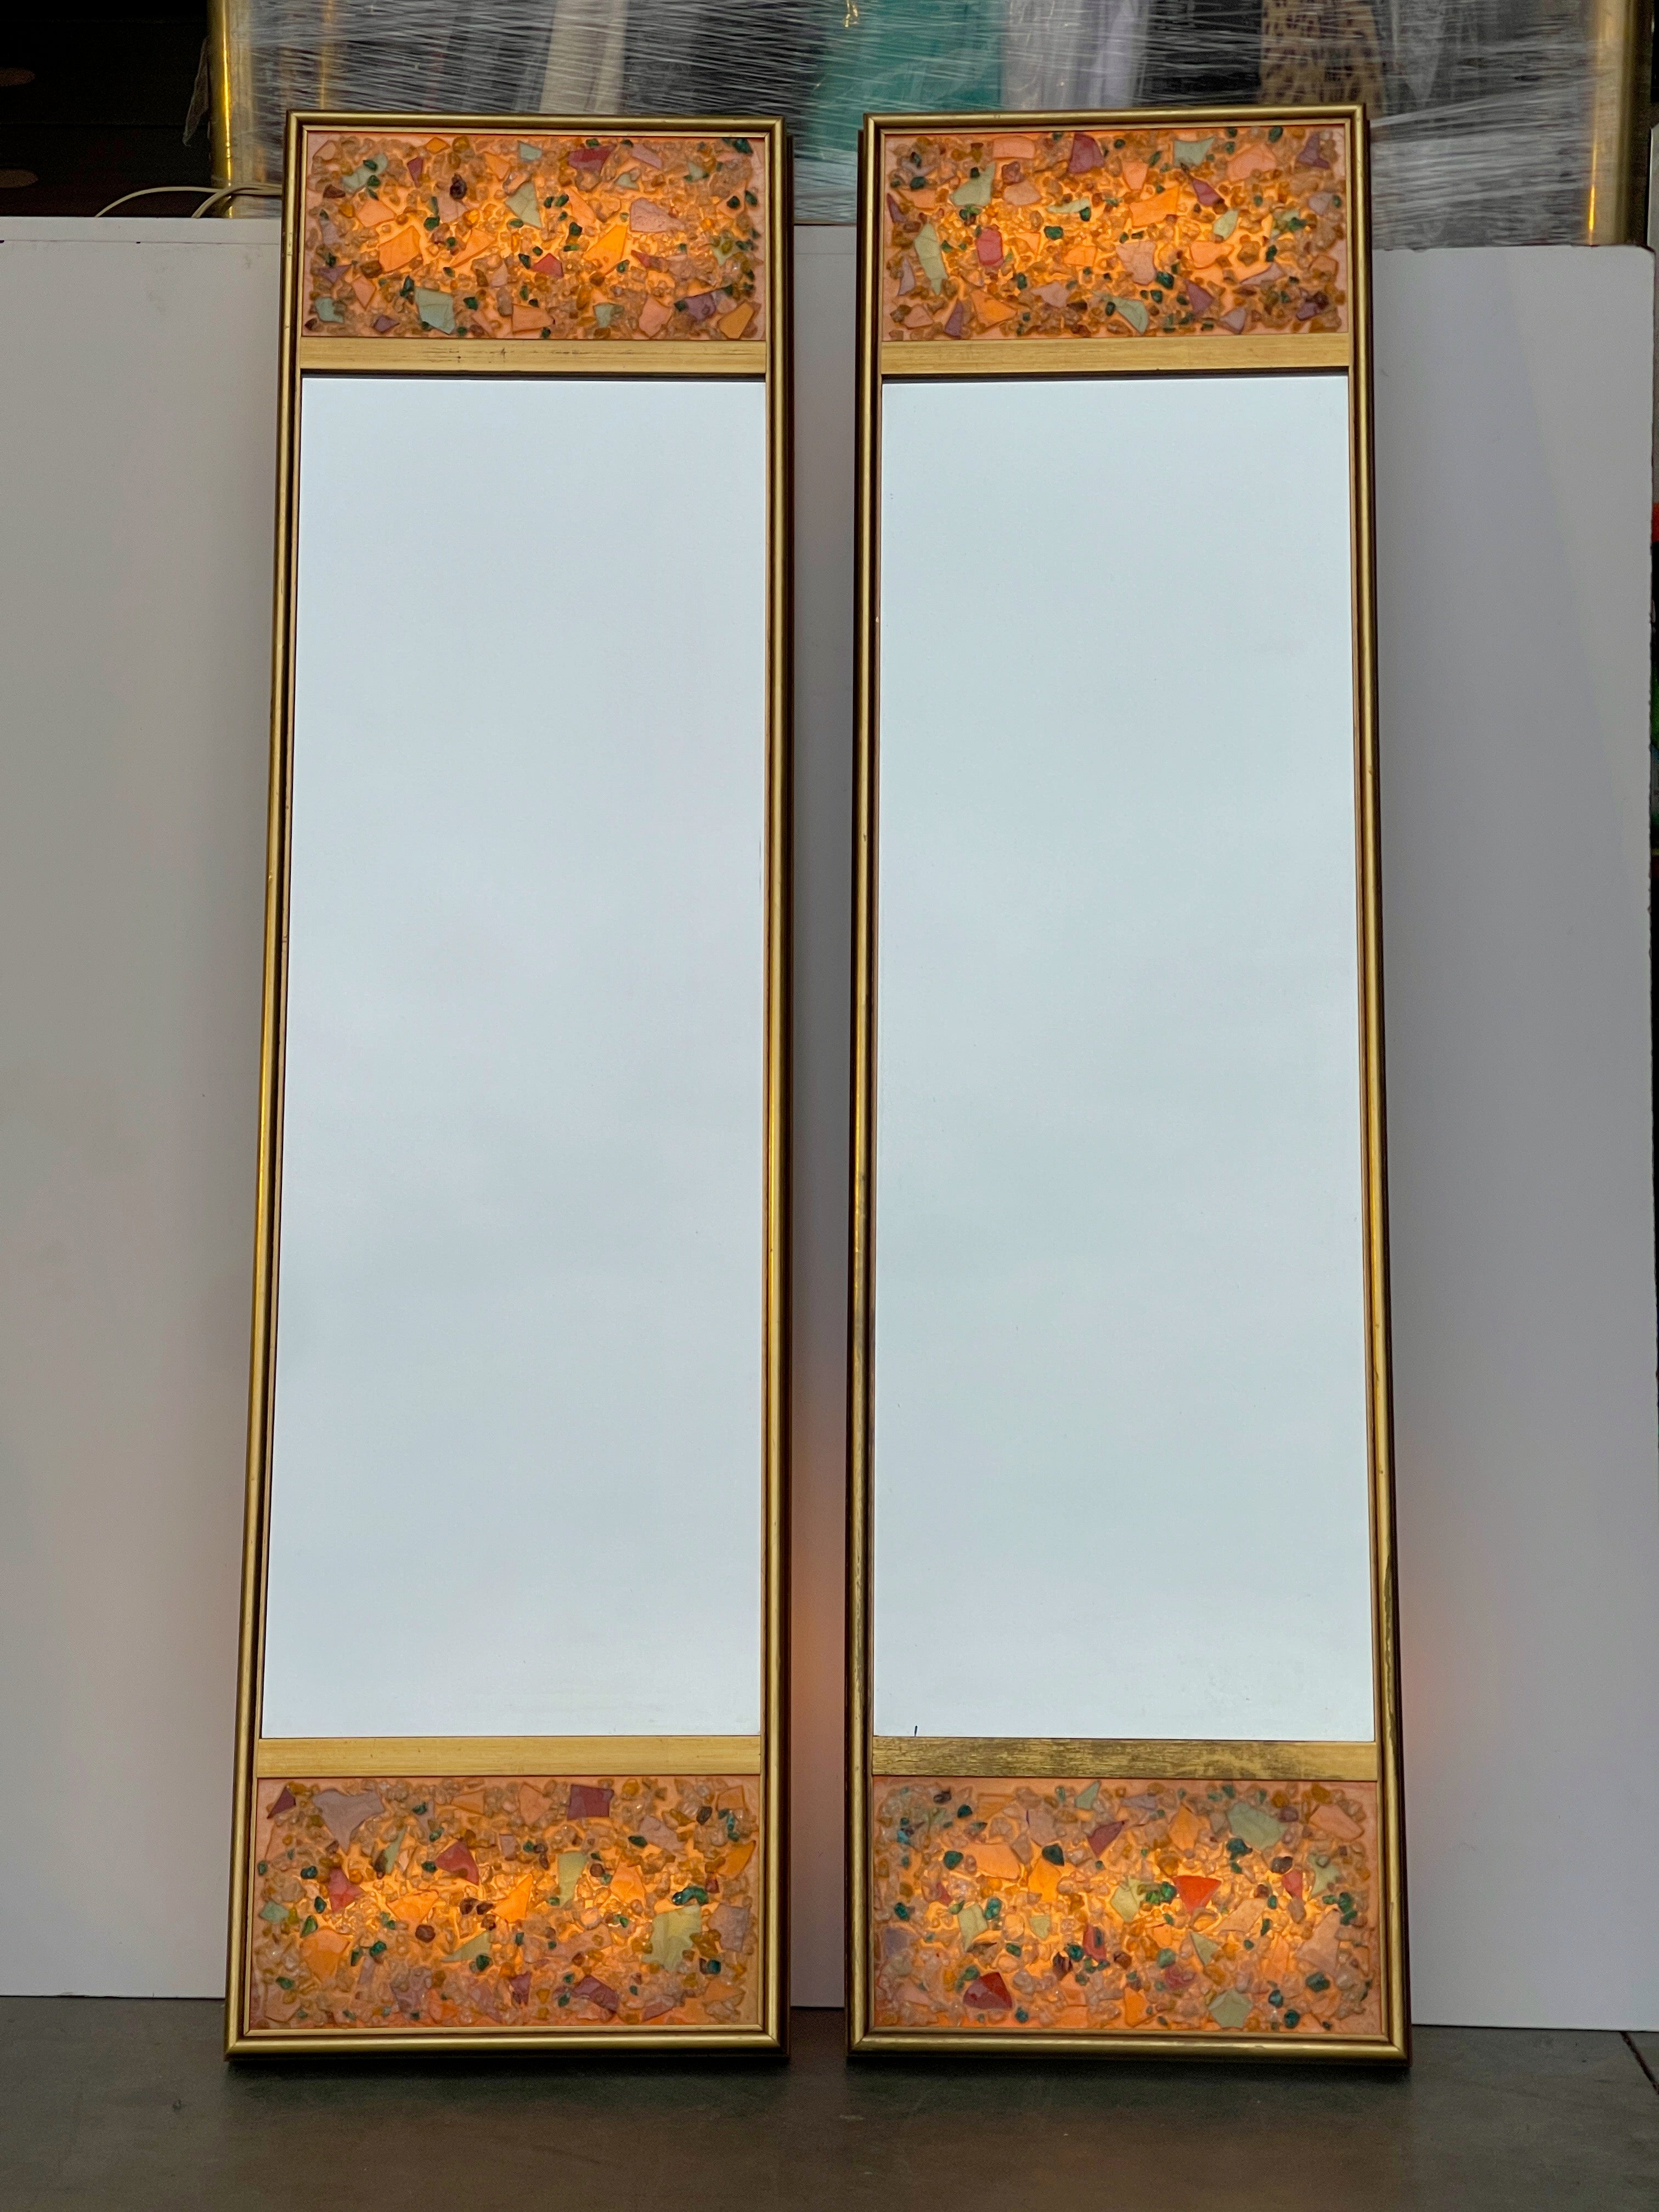 Pair of Hollywood Regency illuminated wall mirrors in gilt wood shadow box frames with inset panels of colored acrylic resin gemstones crafted to look like crushed glass cullet.
From an outrageously over-the-top period Hollywood Regency decorated